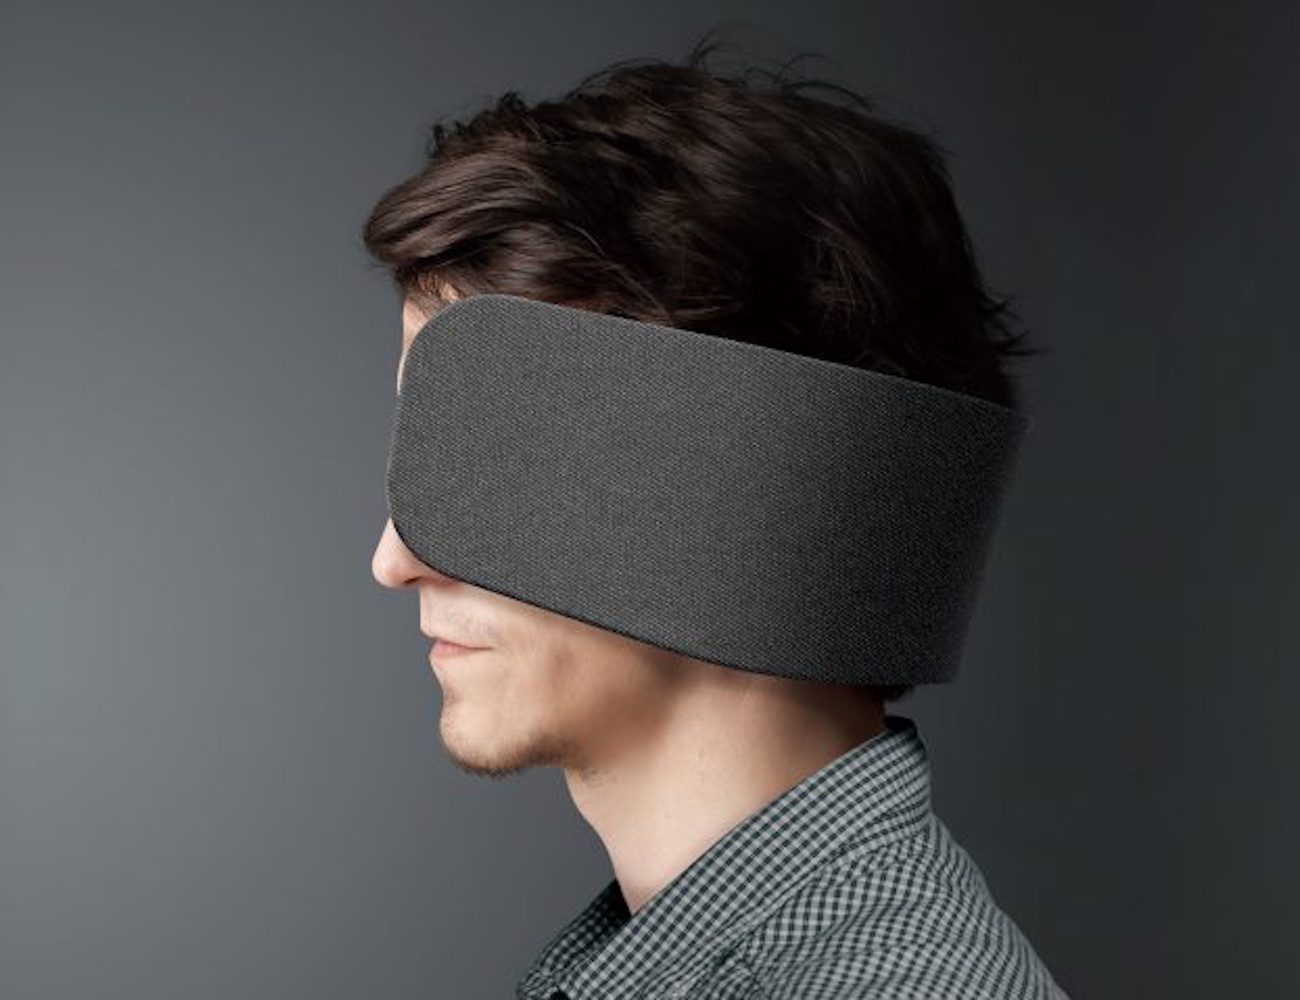 Panasonic Wear Space Wearable Concentration Blinkers